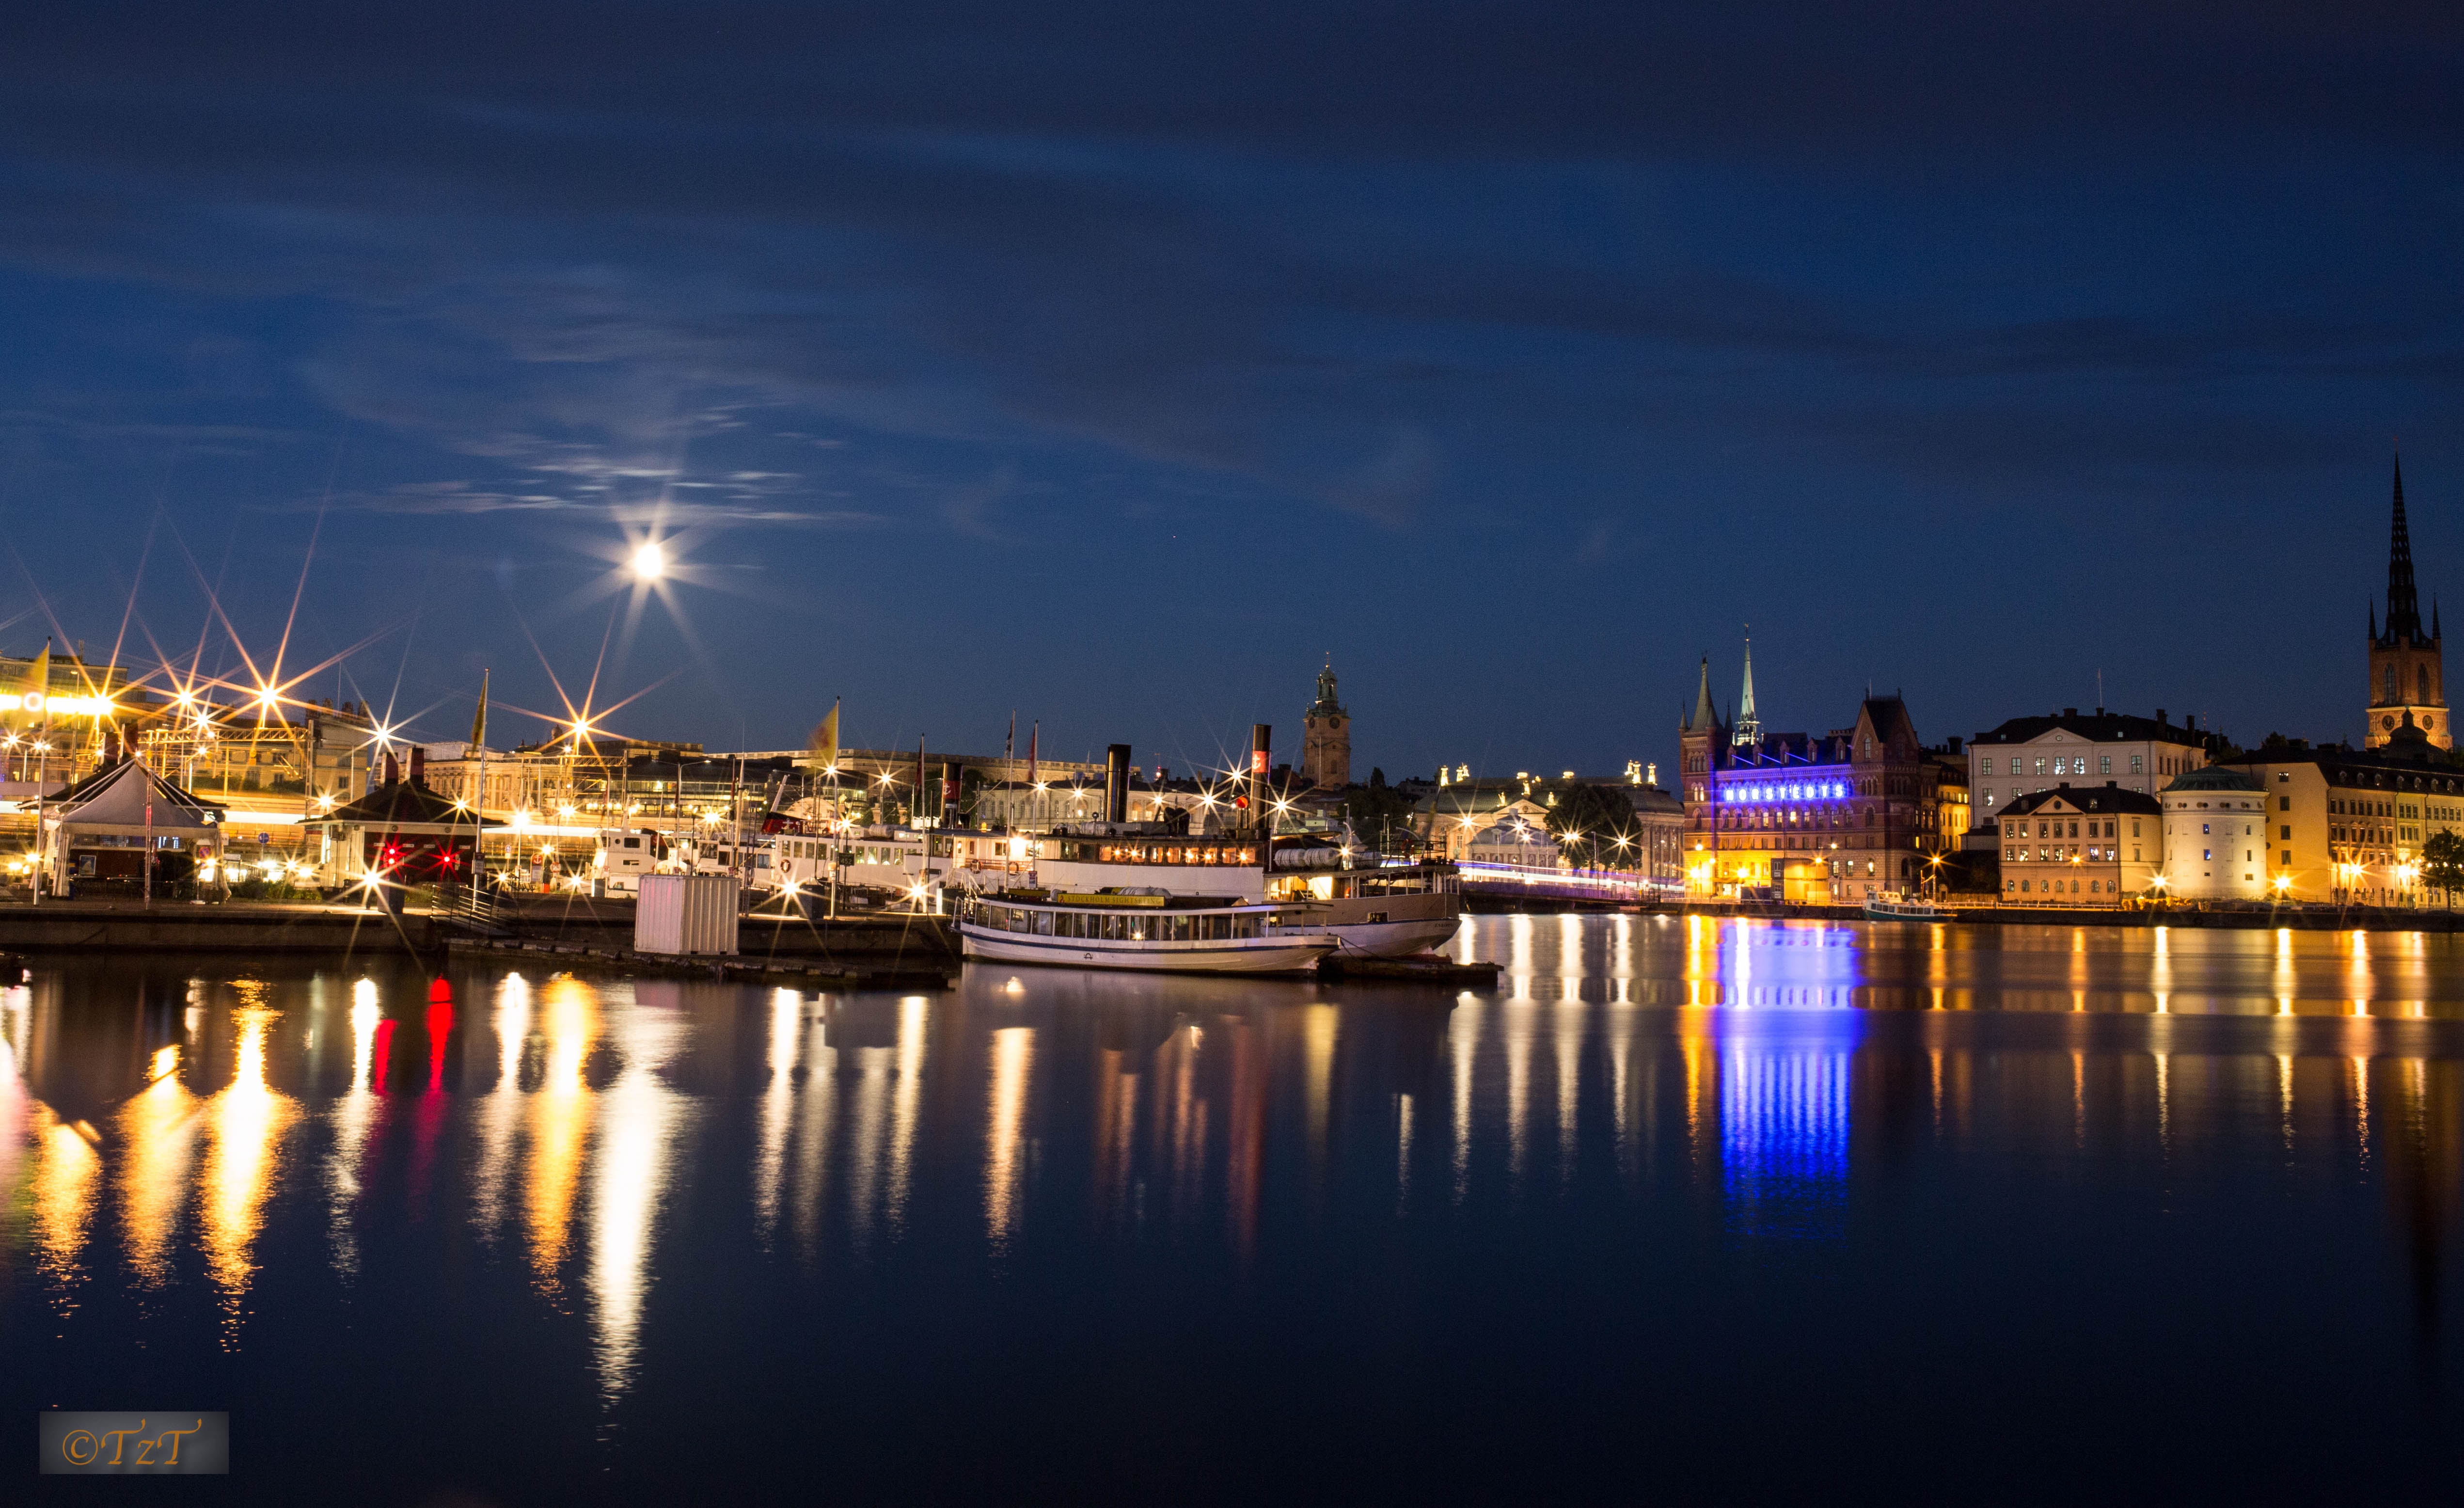 Stockholm, lighted city at night image - Free stock photo - Public ...